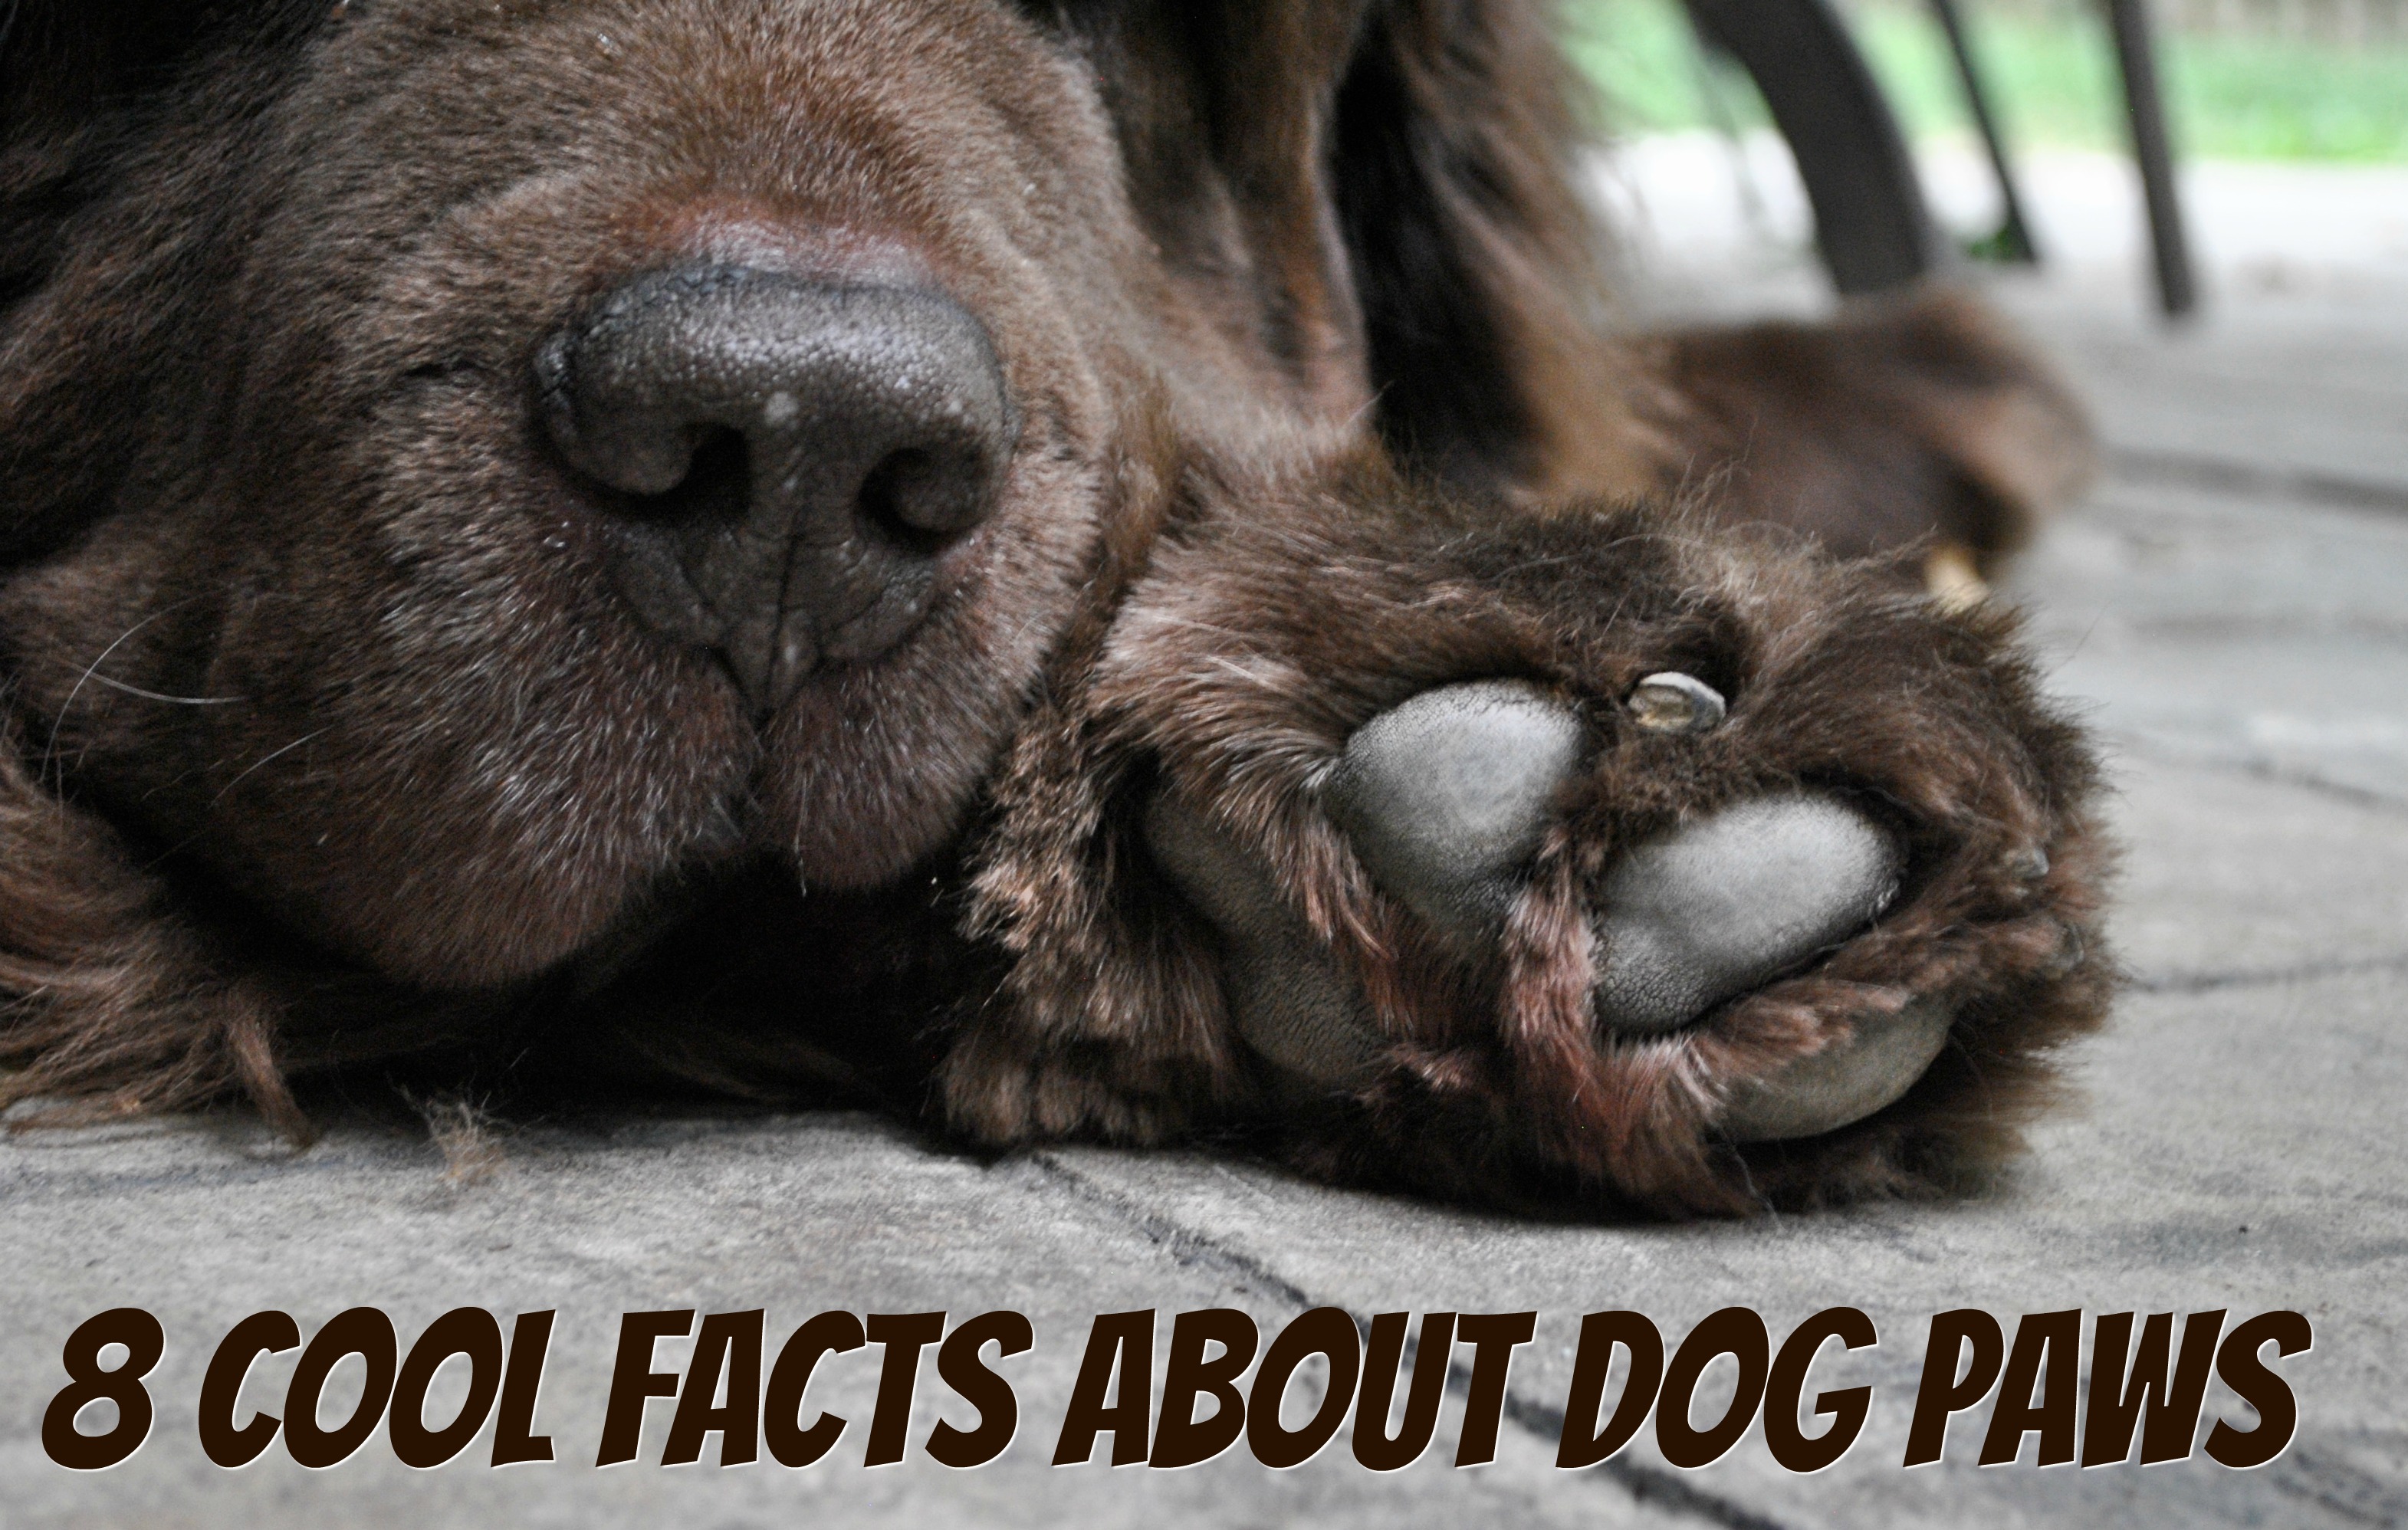 8-cool-facts-about-dog-paws-mybrownnewfies